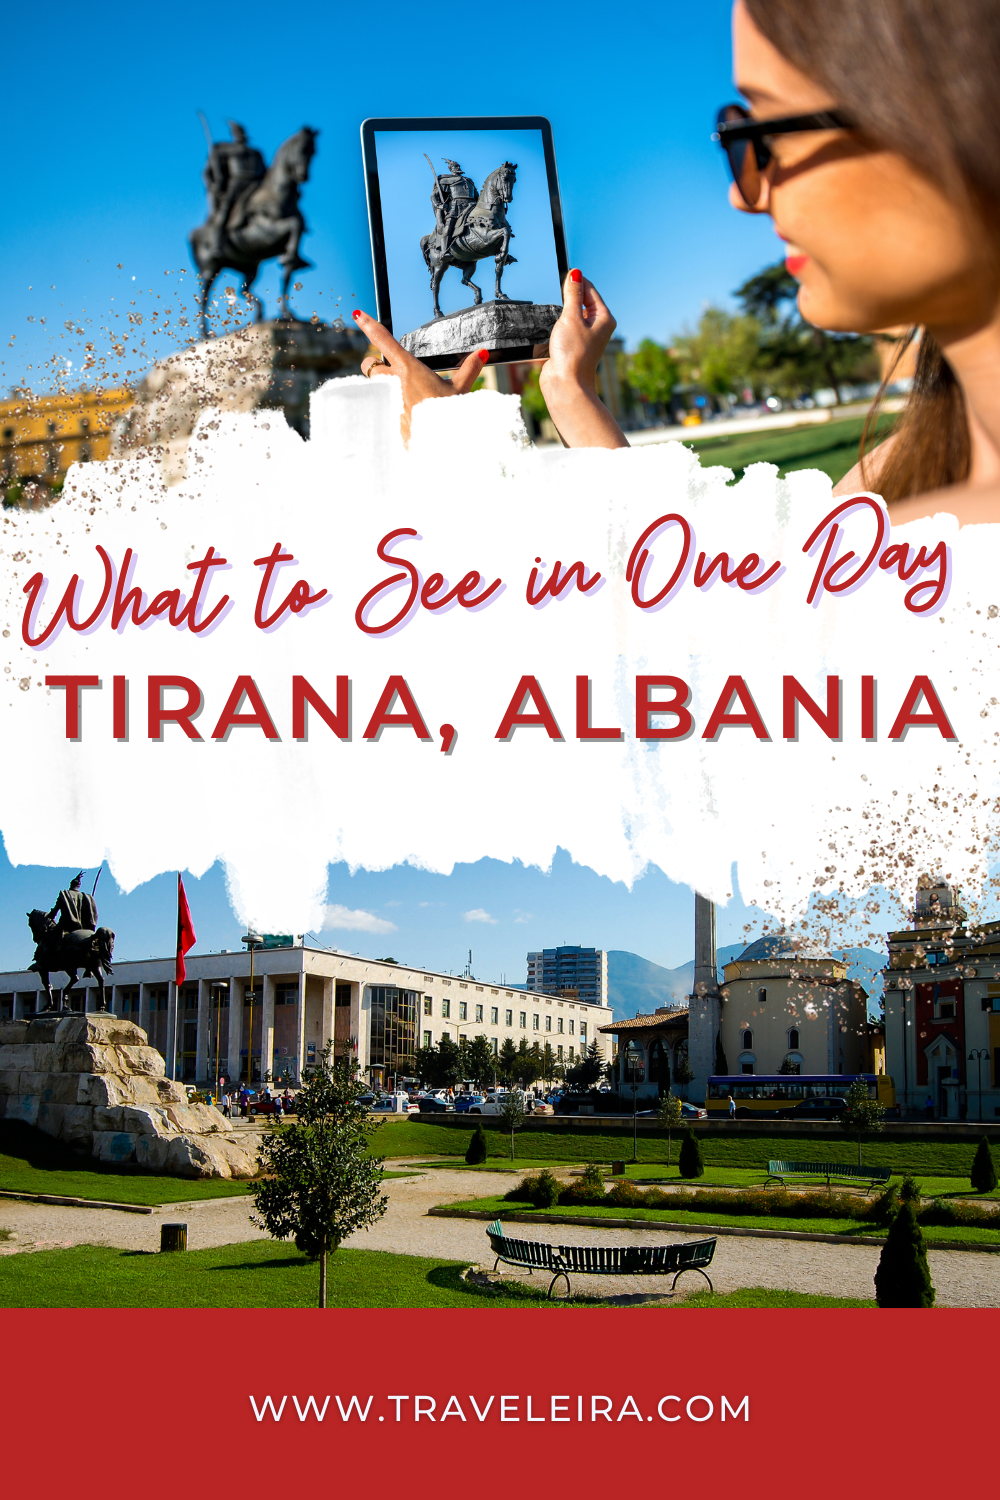 Explore what to see in Tirana in One Day and discover the best things to do in the city if you are spending a day in Tirana.